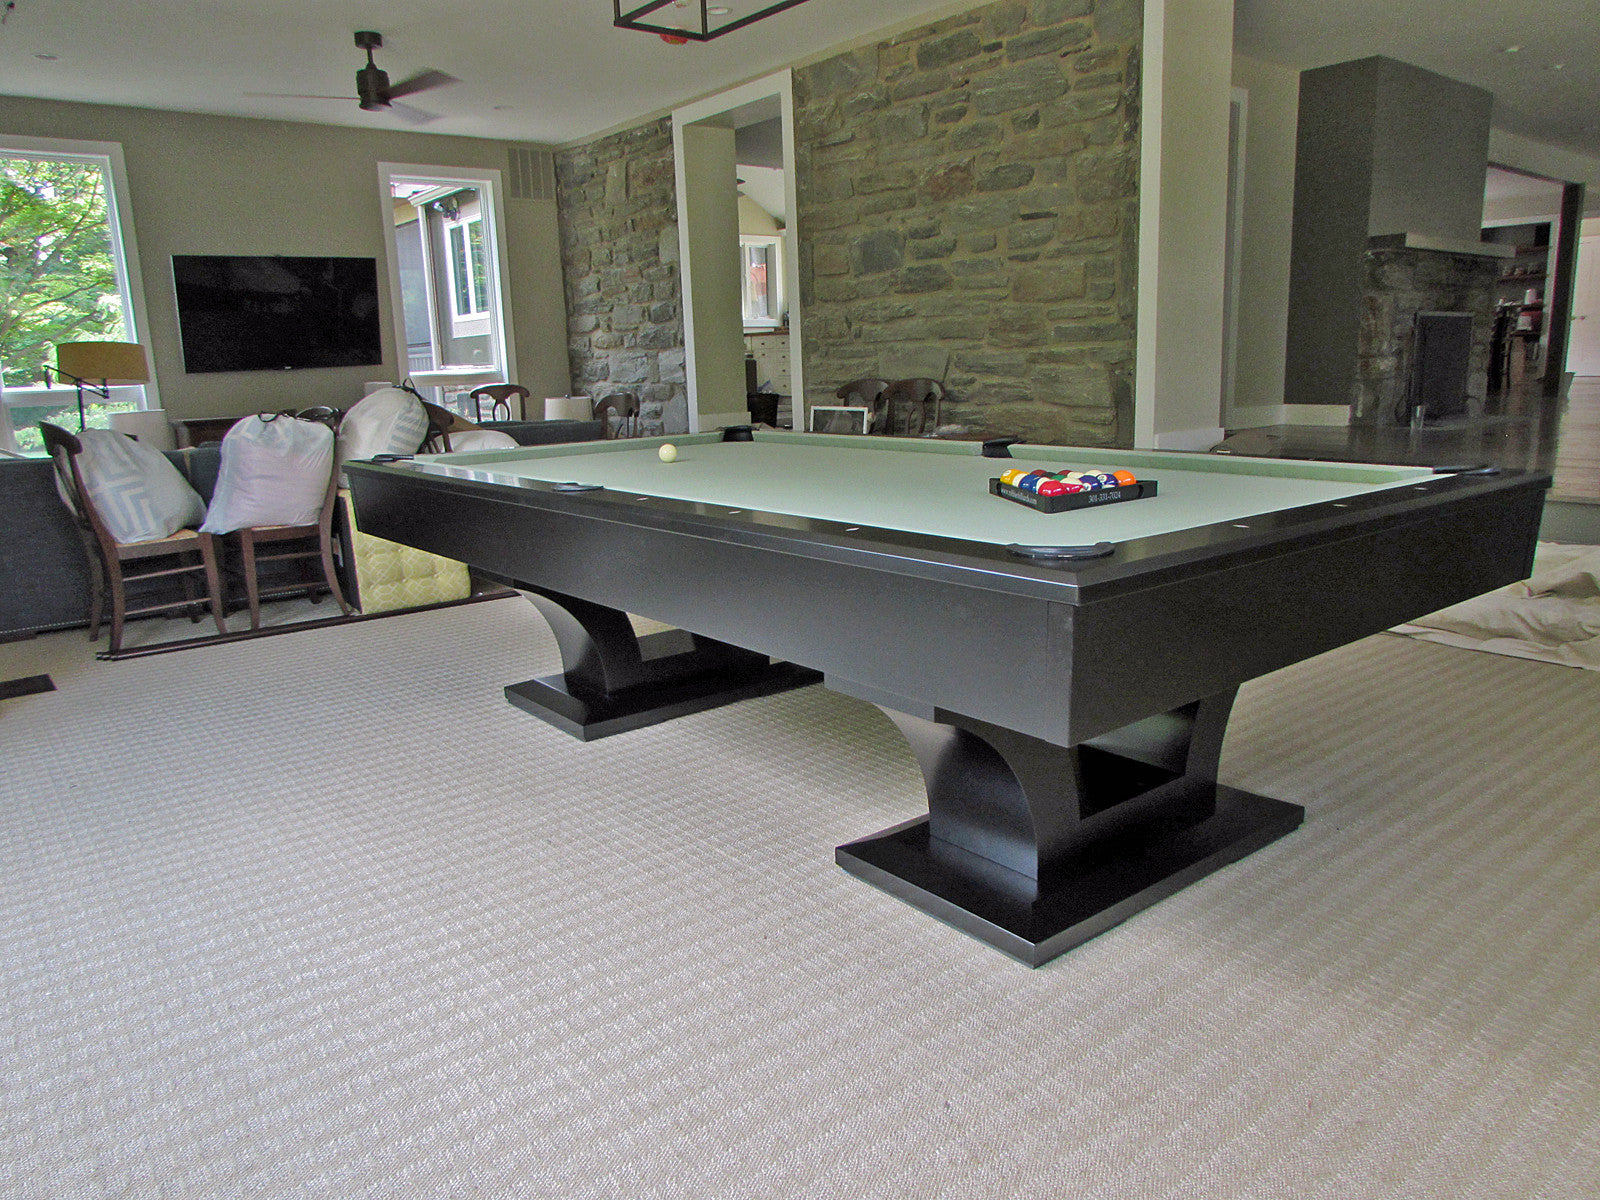 Olhausen Alexandria Pool Table installed in Annapolis Maryland